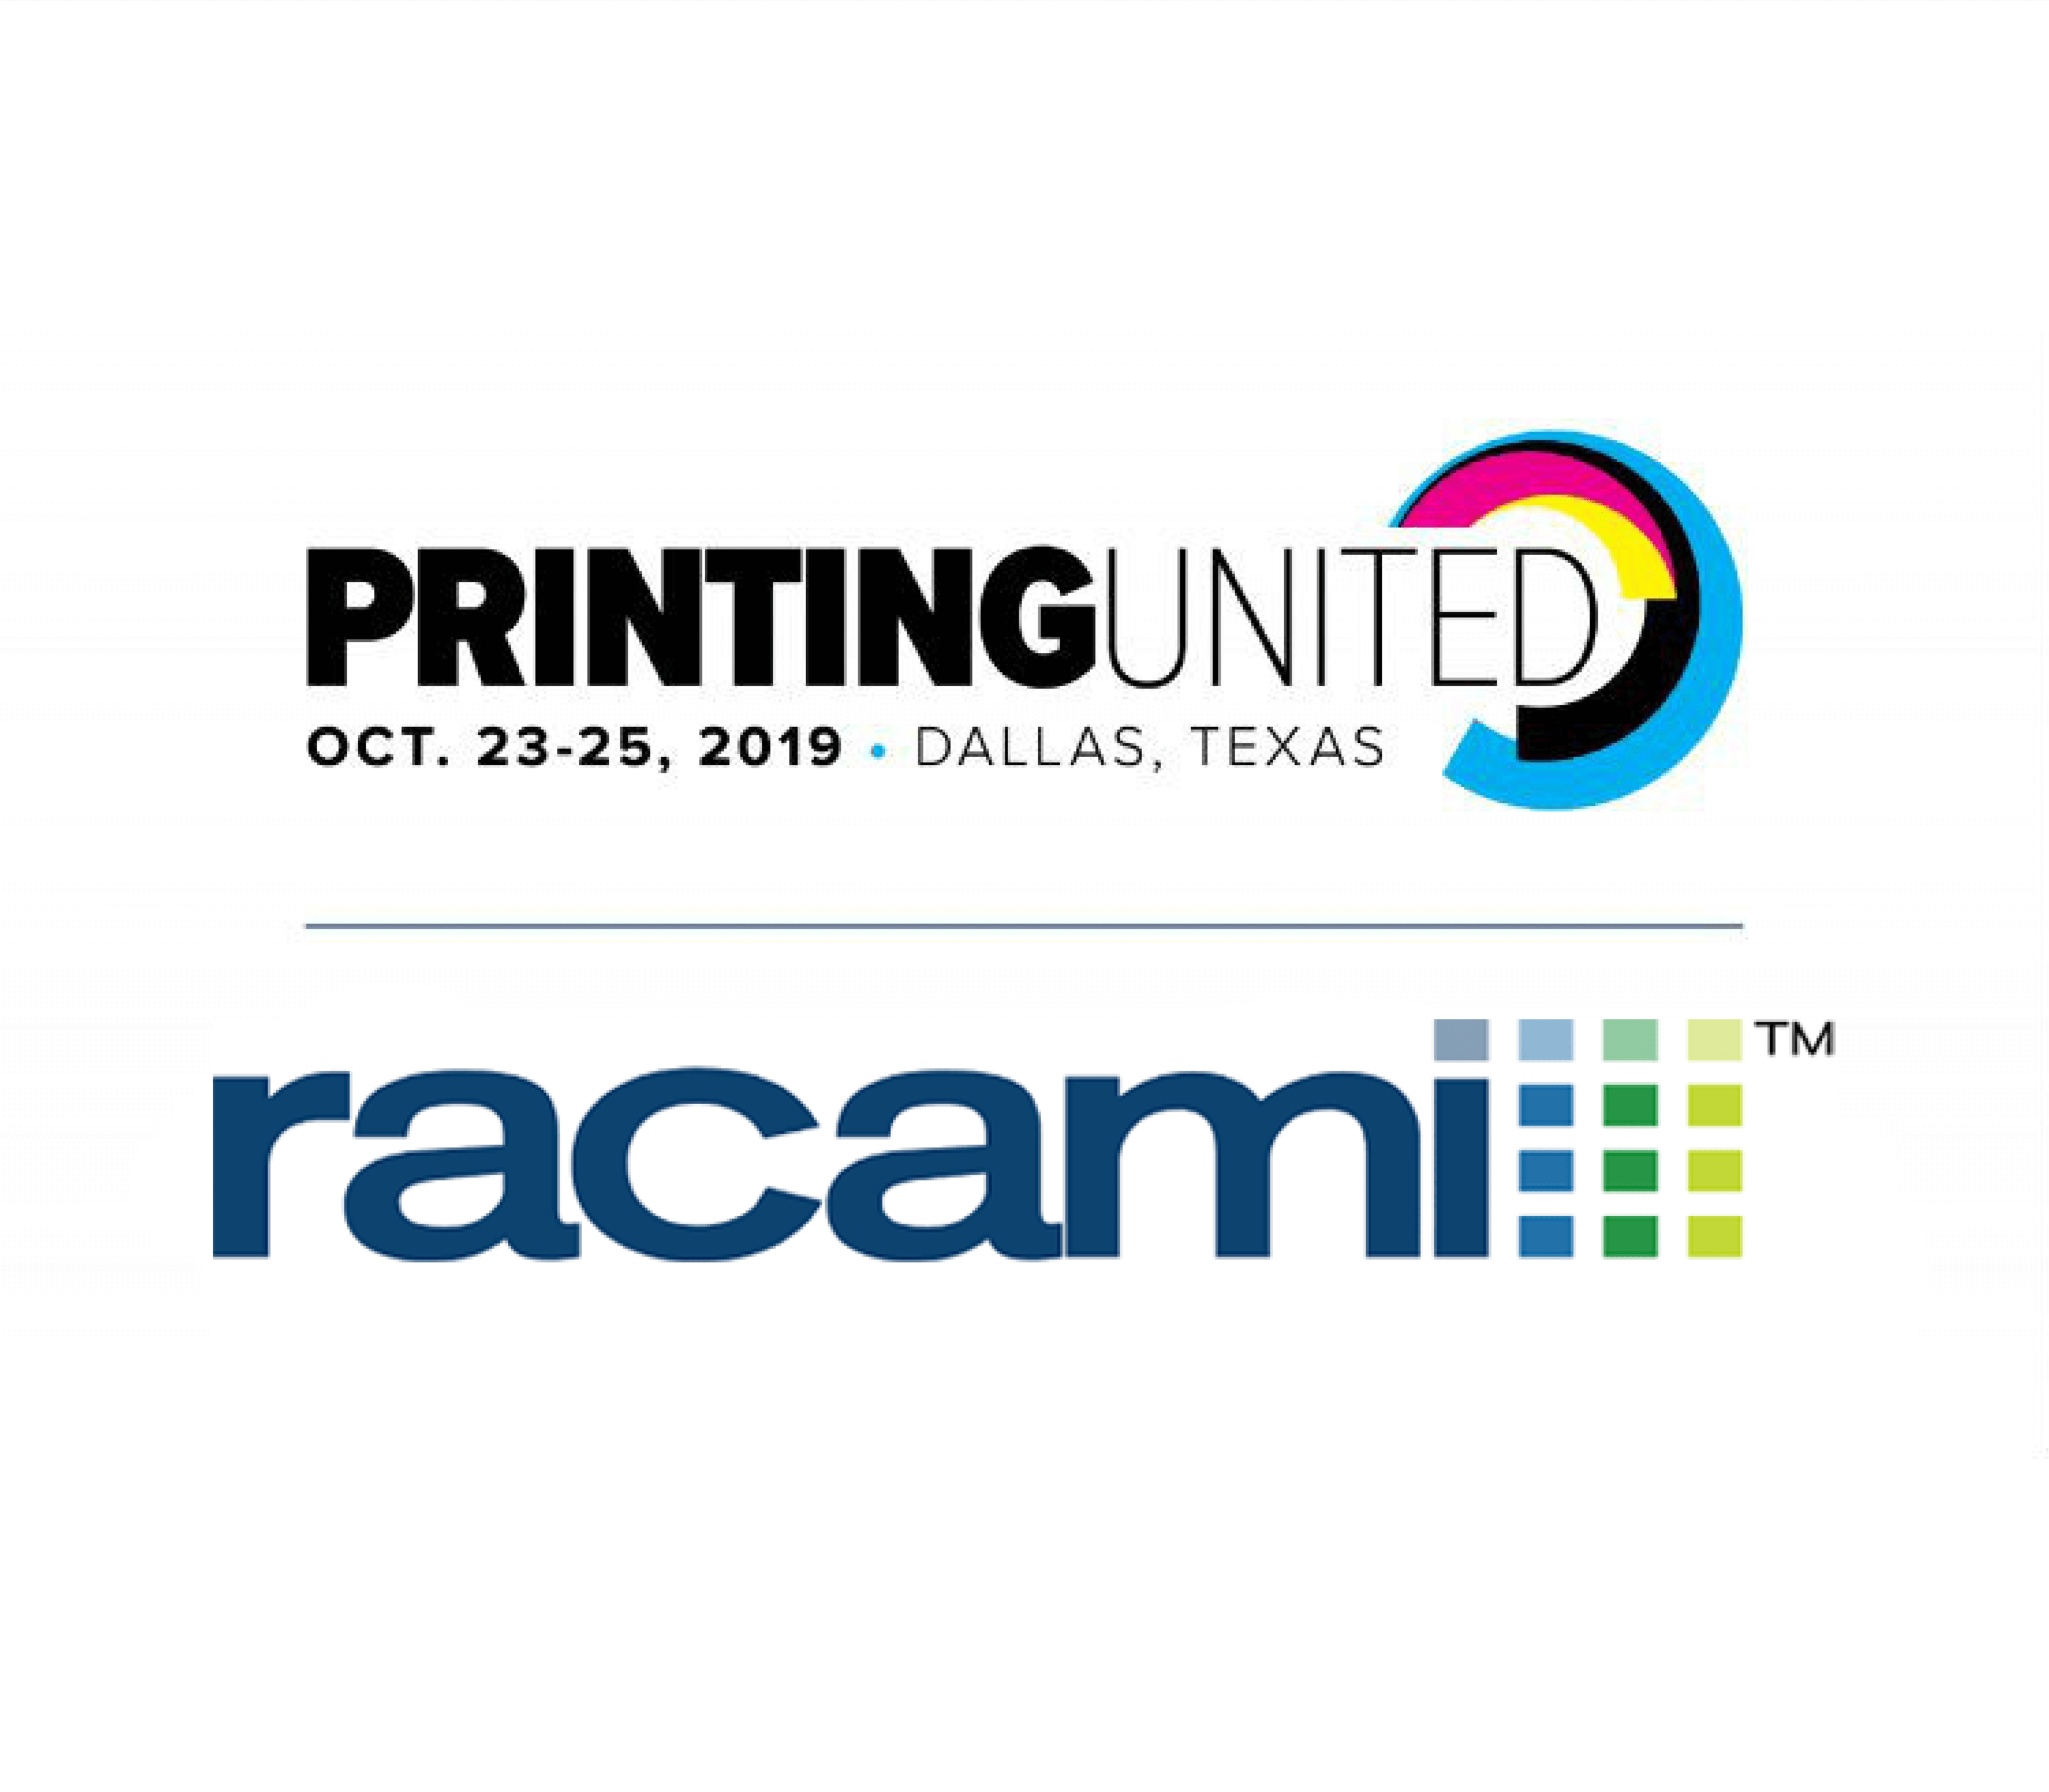 Racami to Bring the Power of Alchem-e to PRINTING United